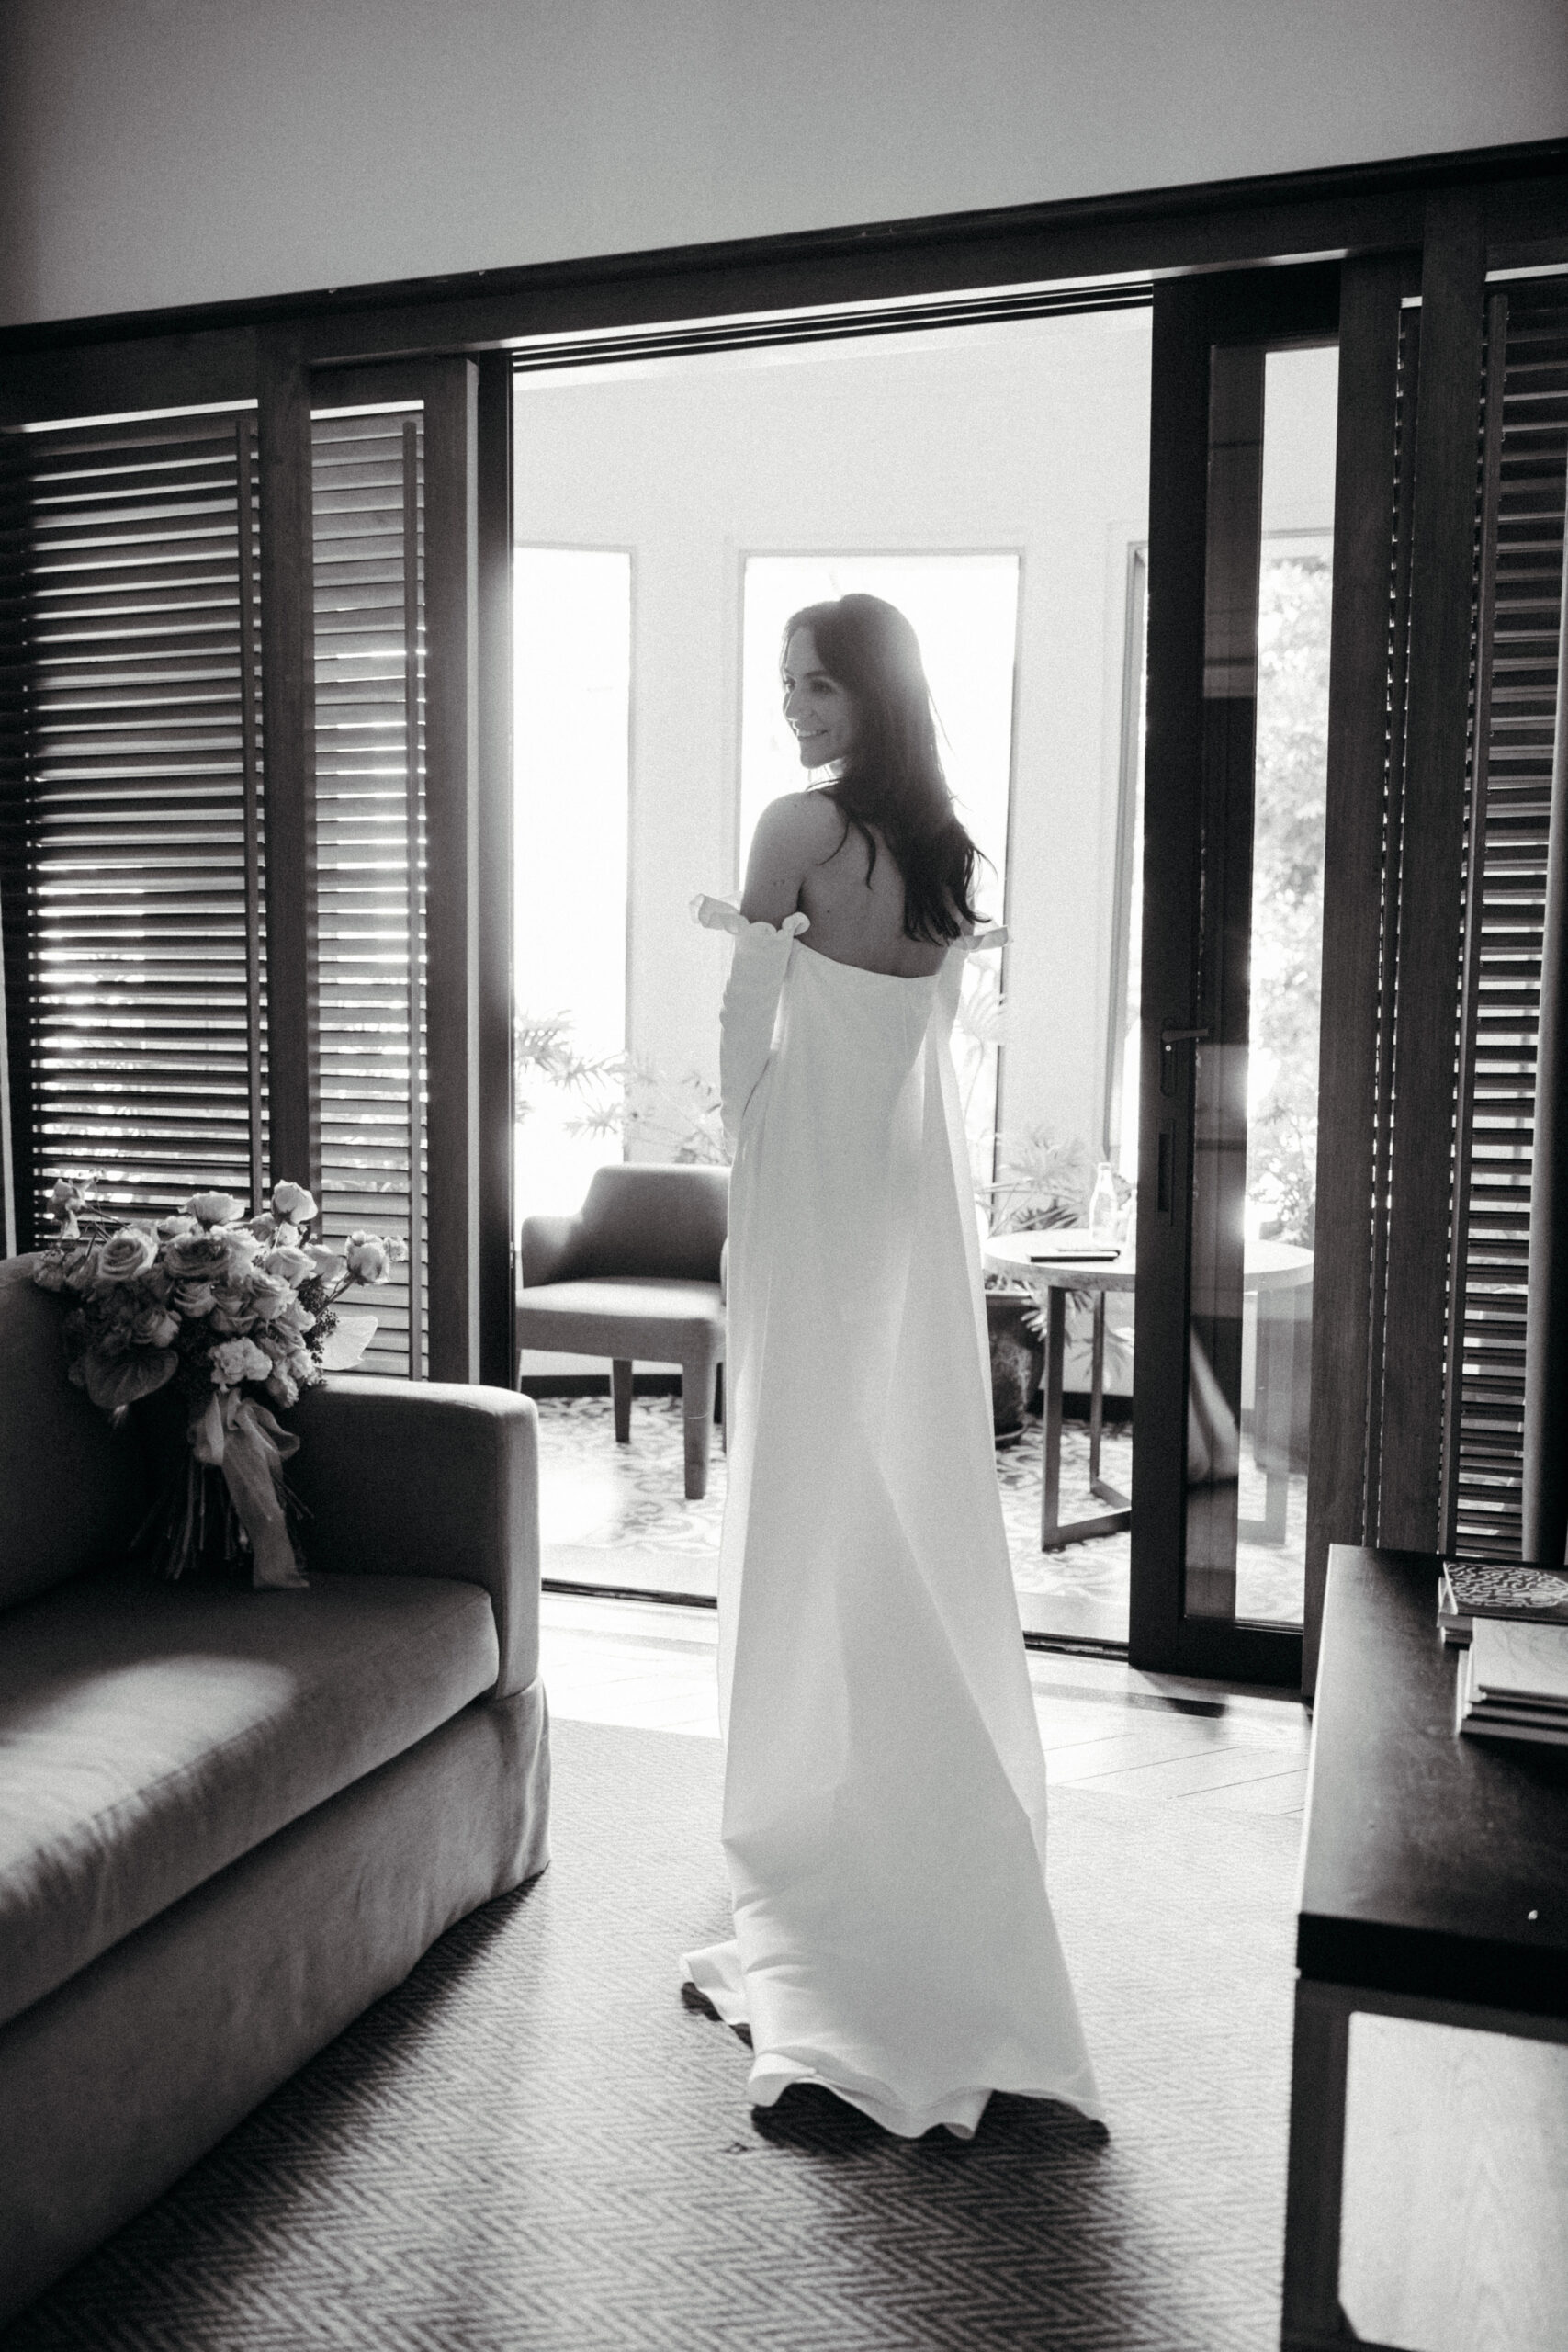 Beautiful bride ready for her dreamy wedding day at Salon Barcelona in Mexico City, Mexico!